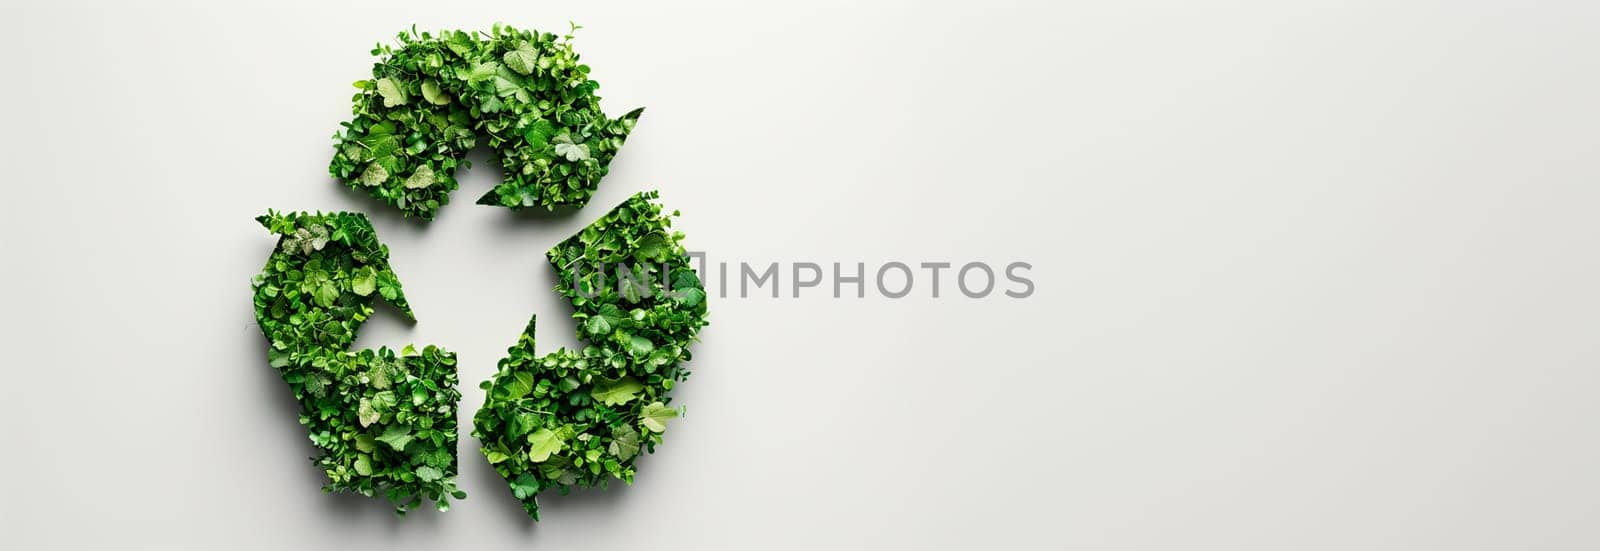 Recycle sign with green leaves. Biodegradable recyclable plastic free package icon. Bio recyclable degradable label logo template Copy space Space for text